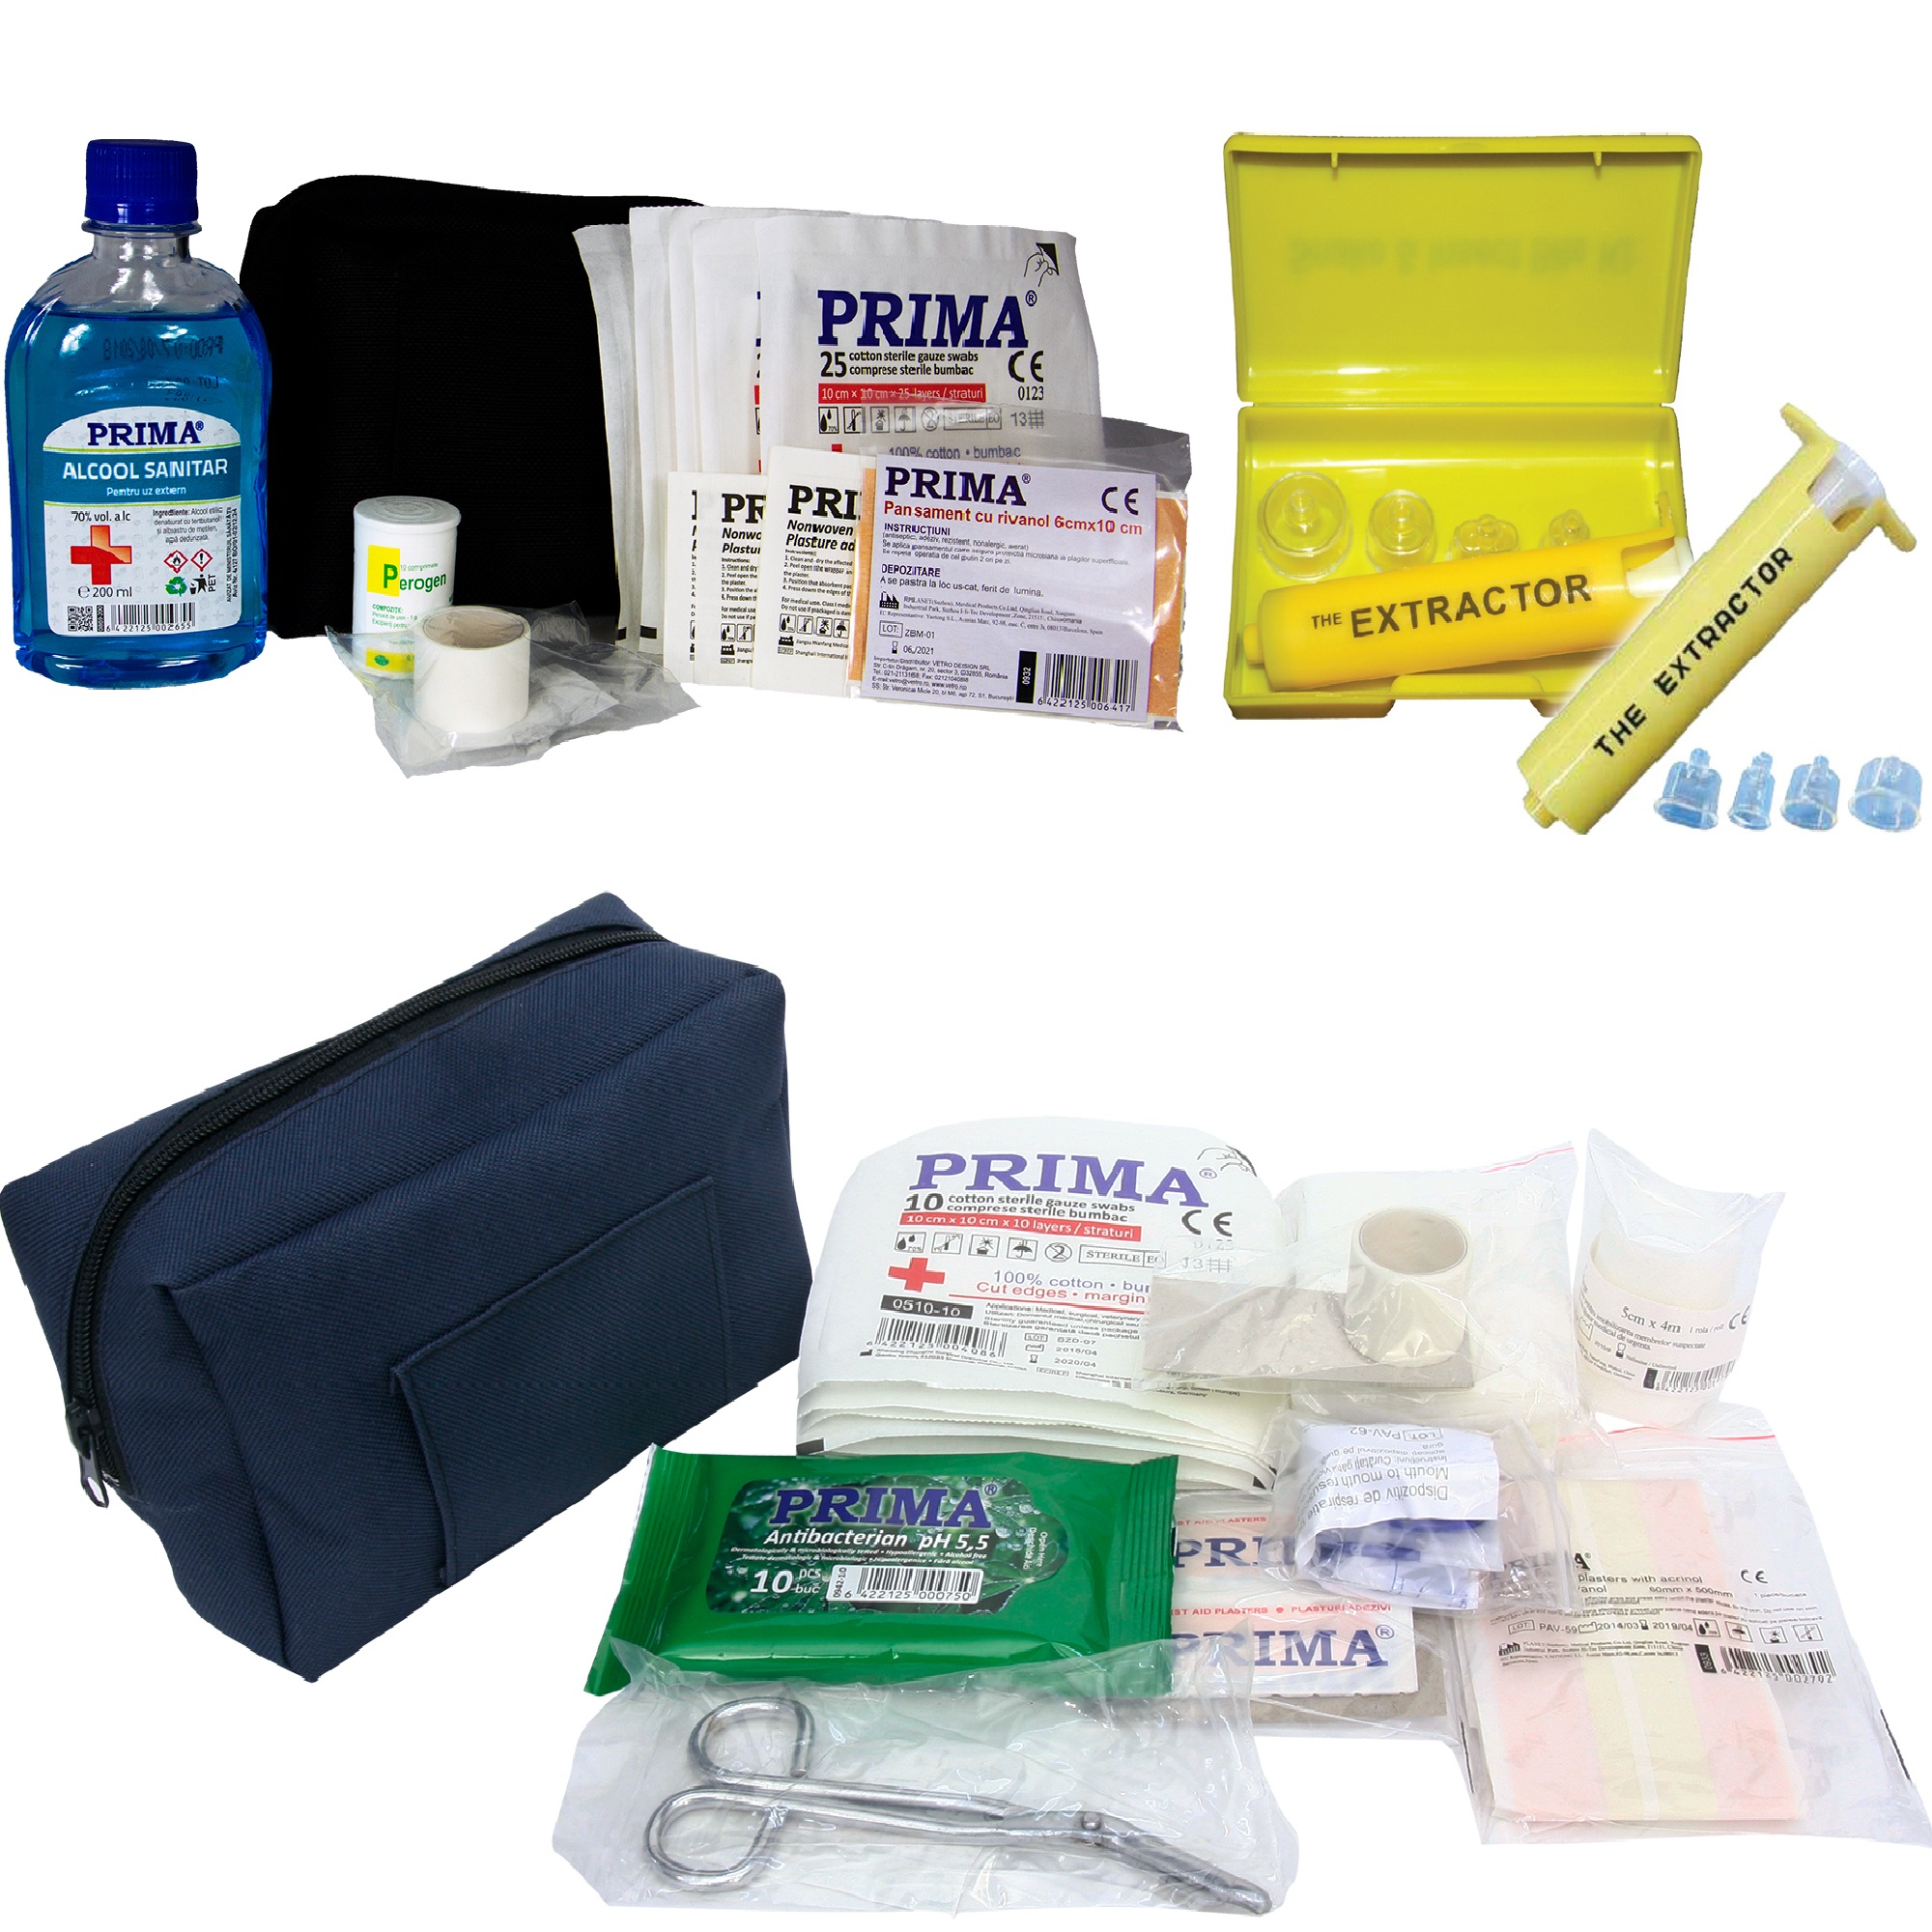 First Aid/FIRST AID KITS/Travel First Aid Emergency Kits